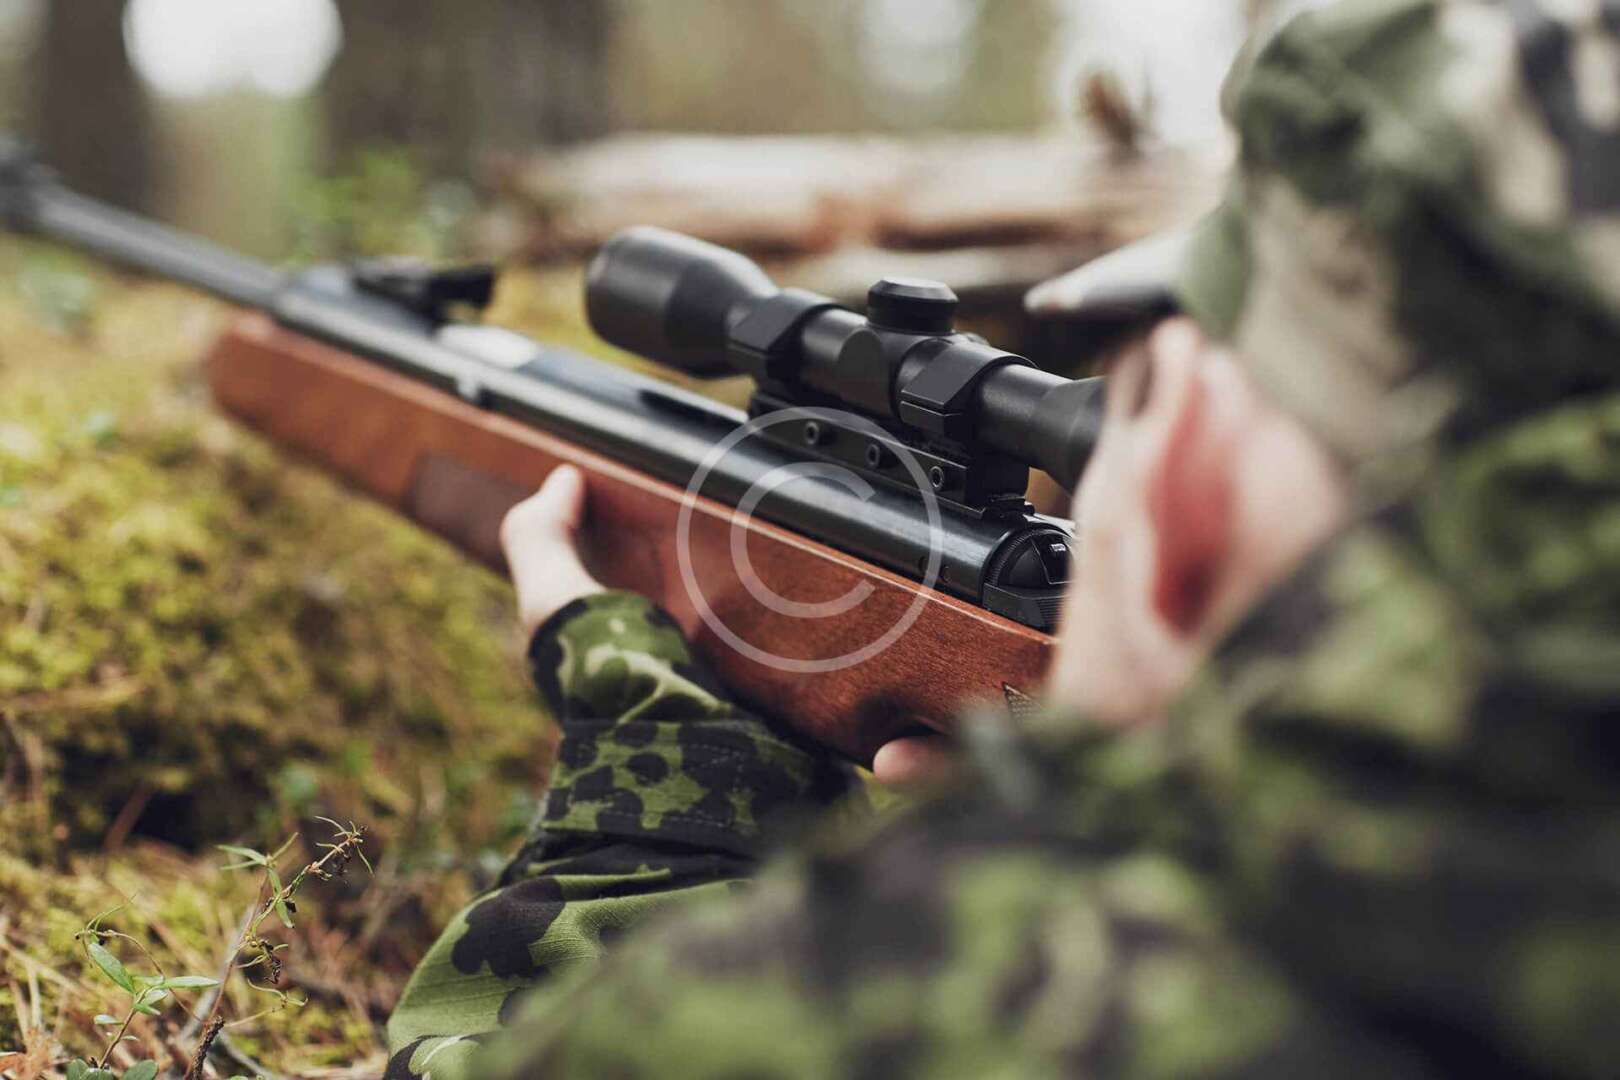 A man in camouflage shooting a rifle in the woods.